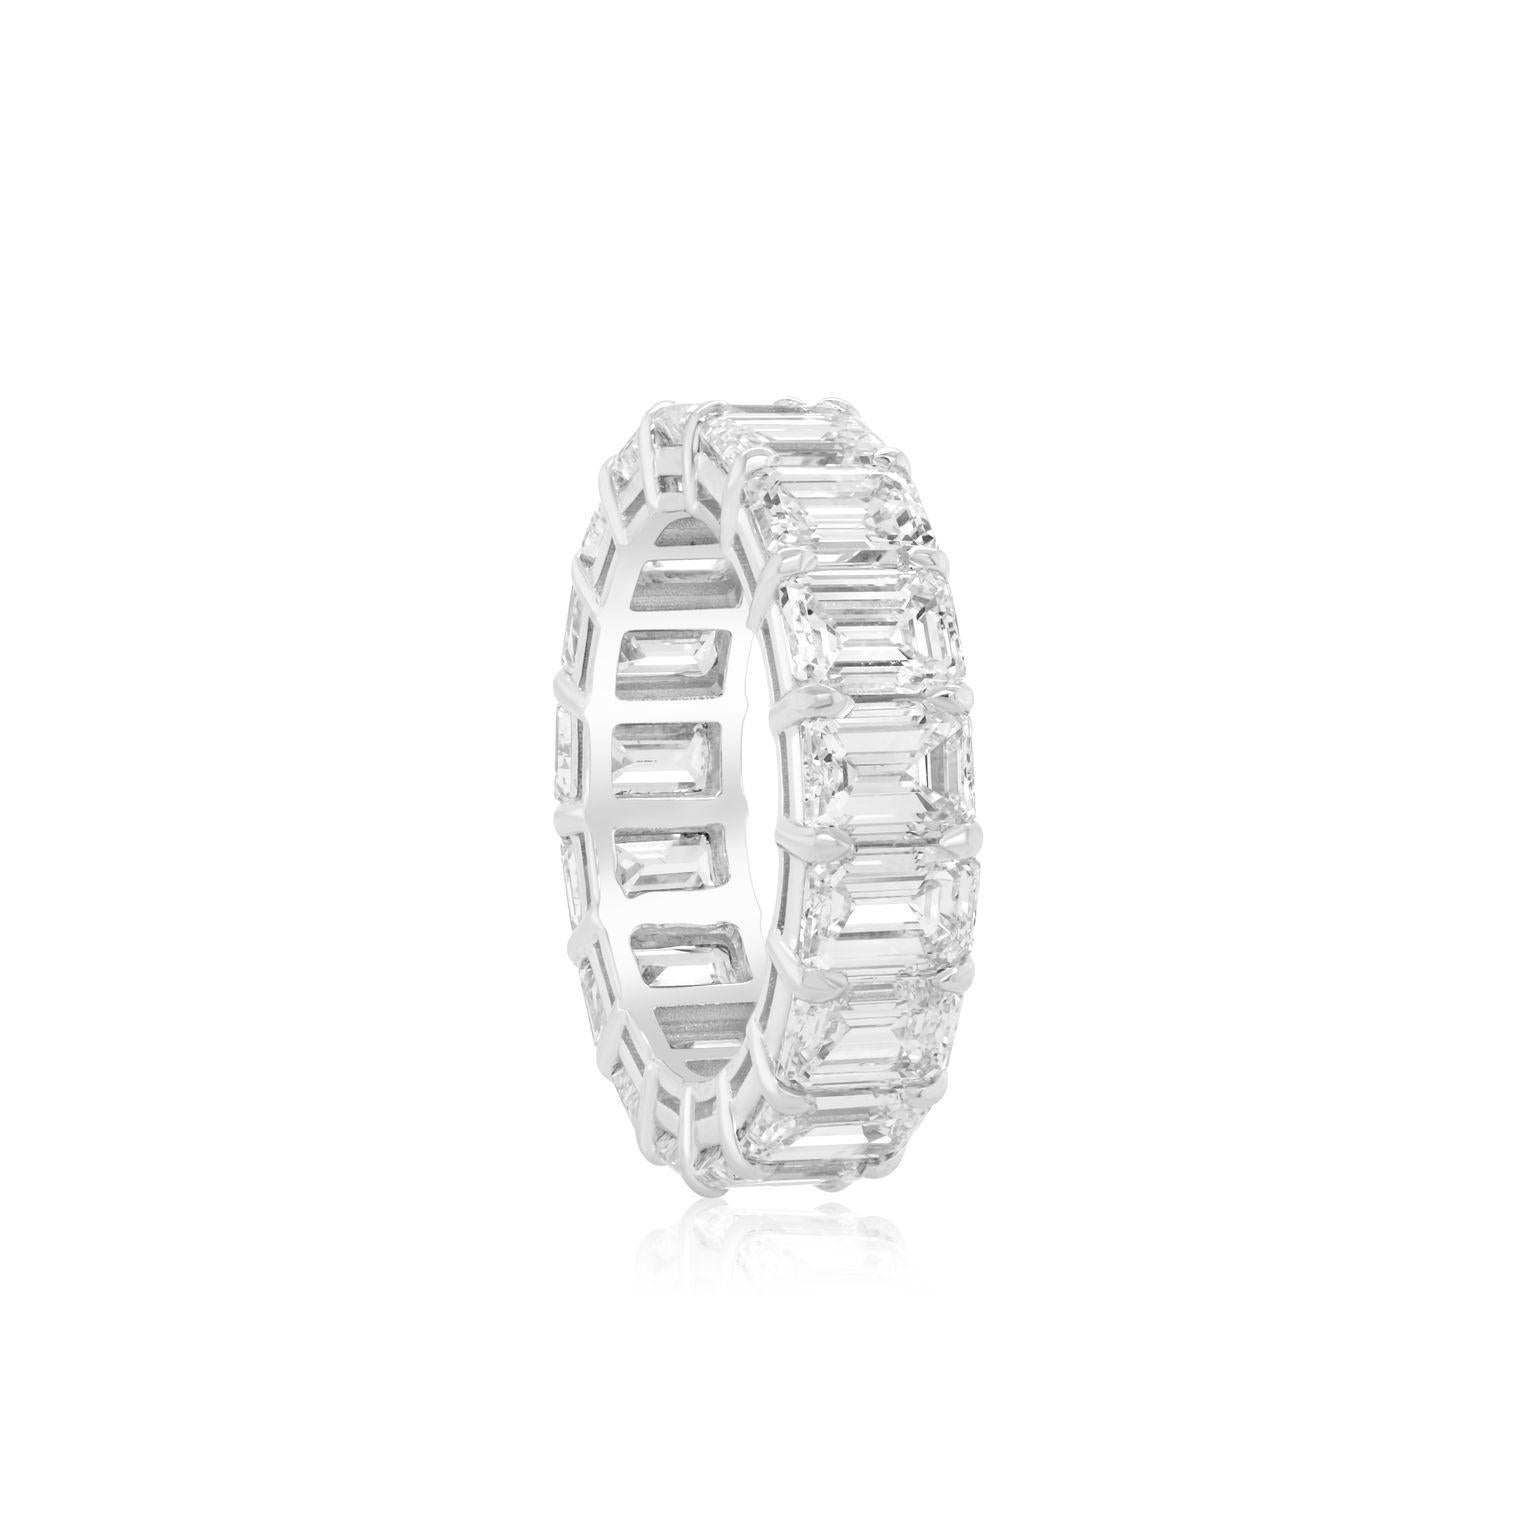 PLATINUM WITH 19 EMERALD CUT DIAMONDS  RING, WIEGHING 6.40CTS, 
Diana M. is a leading supplier of top-quality fine jewelry for over 35 years.
Diana M is one-stop shop for all your jewelry shopping, carrying line of diamond rings, earrings,